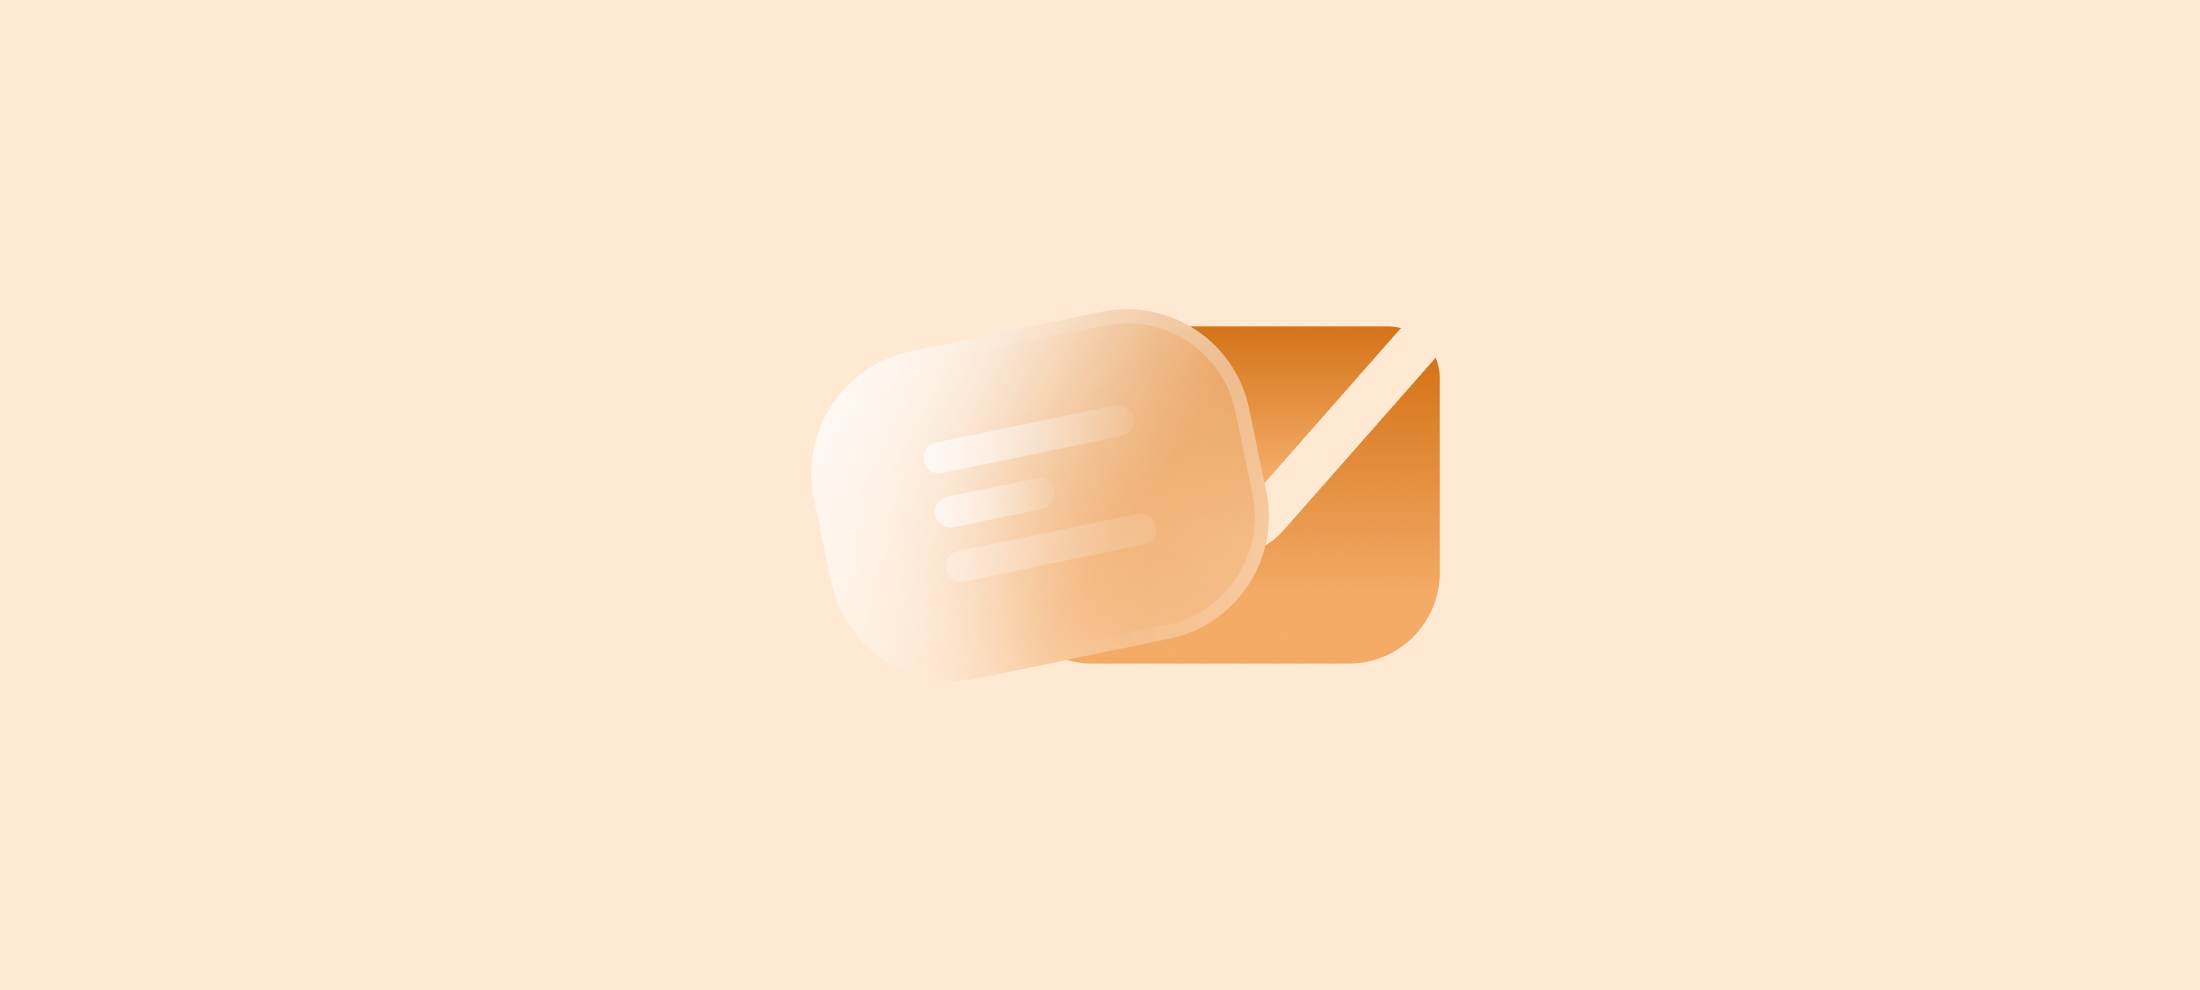 graphic image of an open letter on an orange background